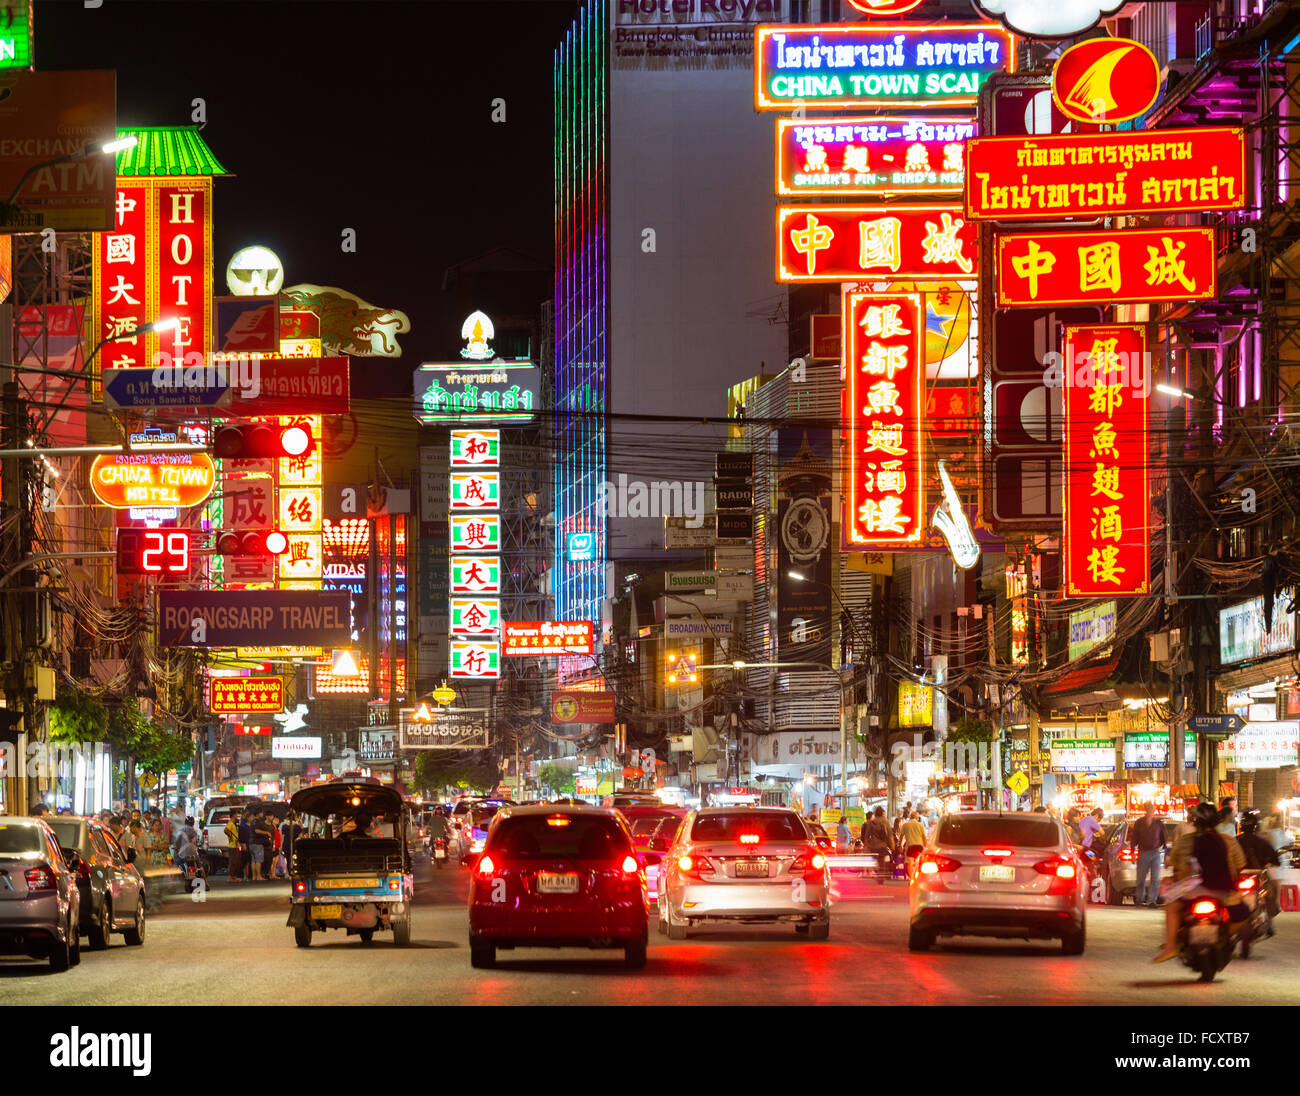 Yaowarat Road in Chinatown, neon signs at night, people and cars, commercial street, billboards, nightlife, Bangkok, Thailand Stock Photo